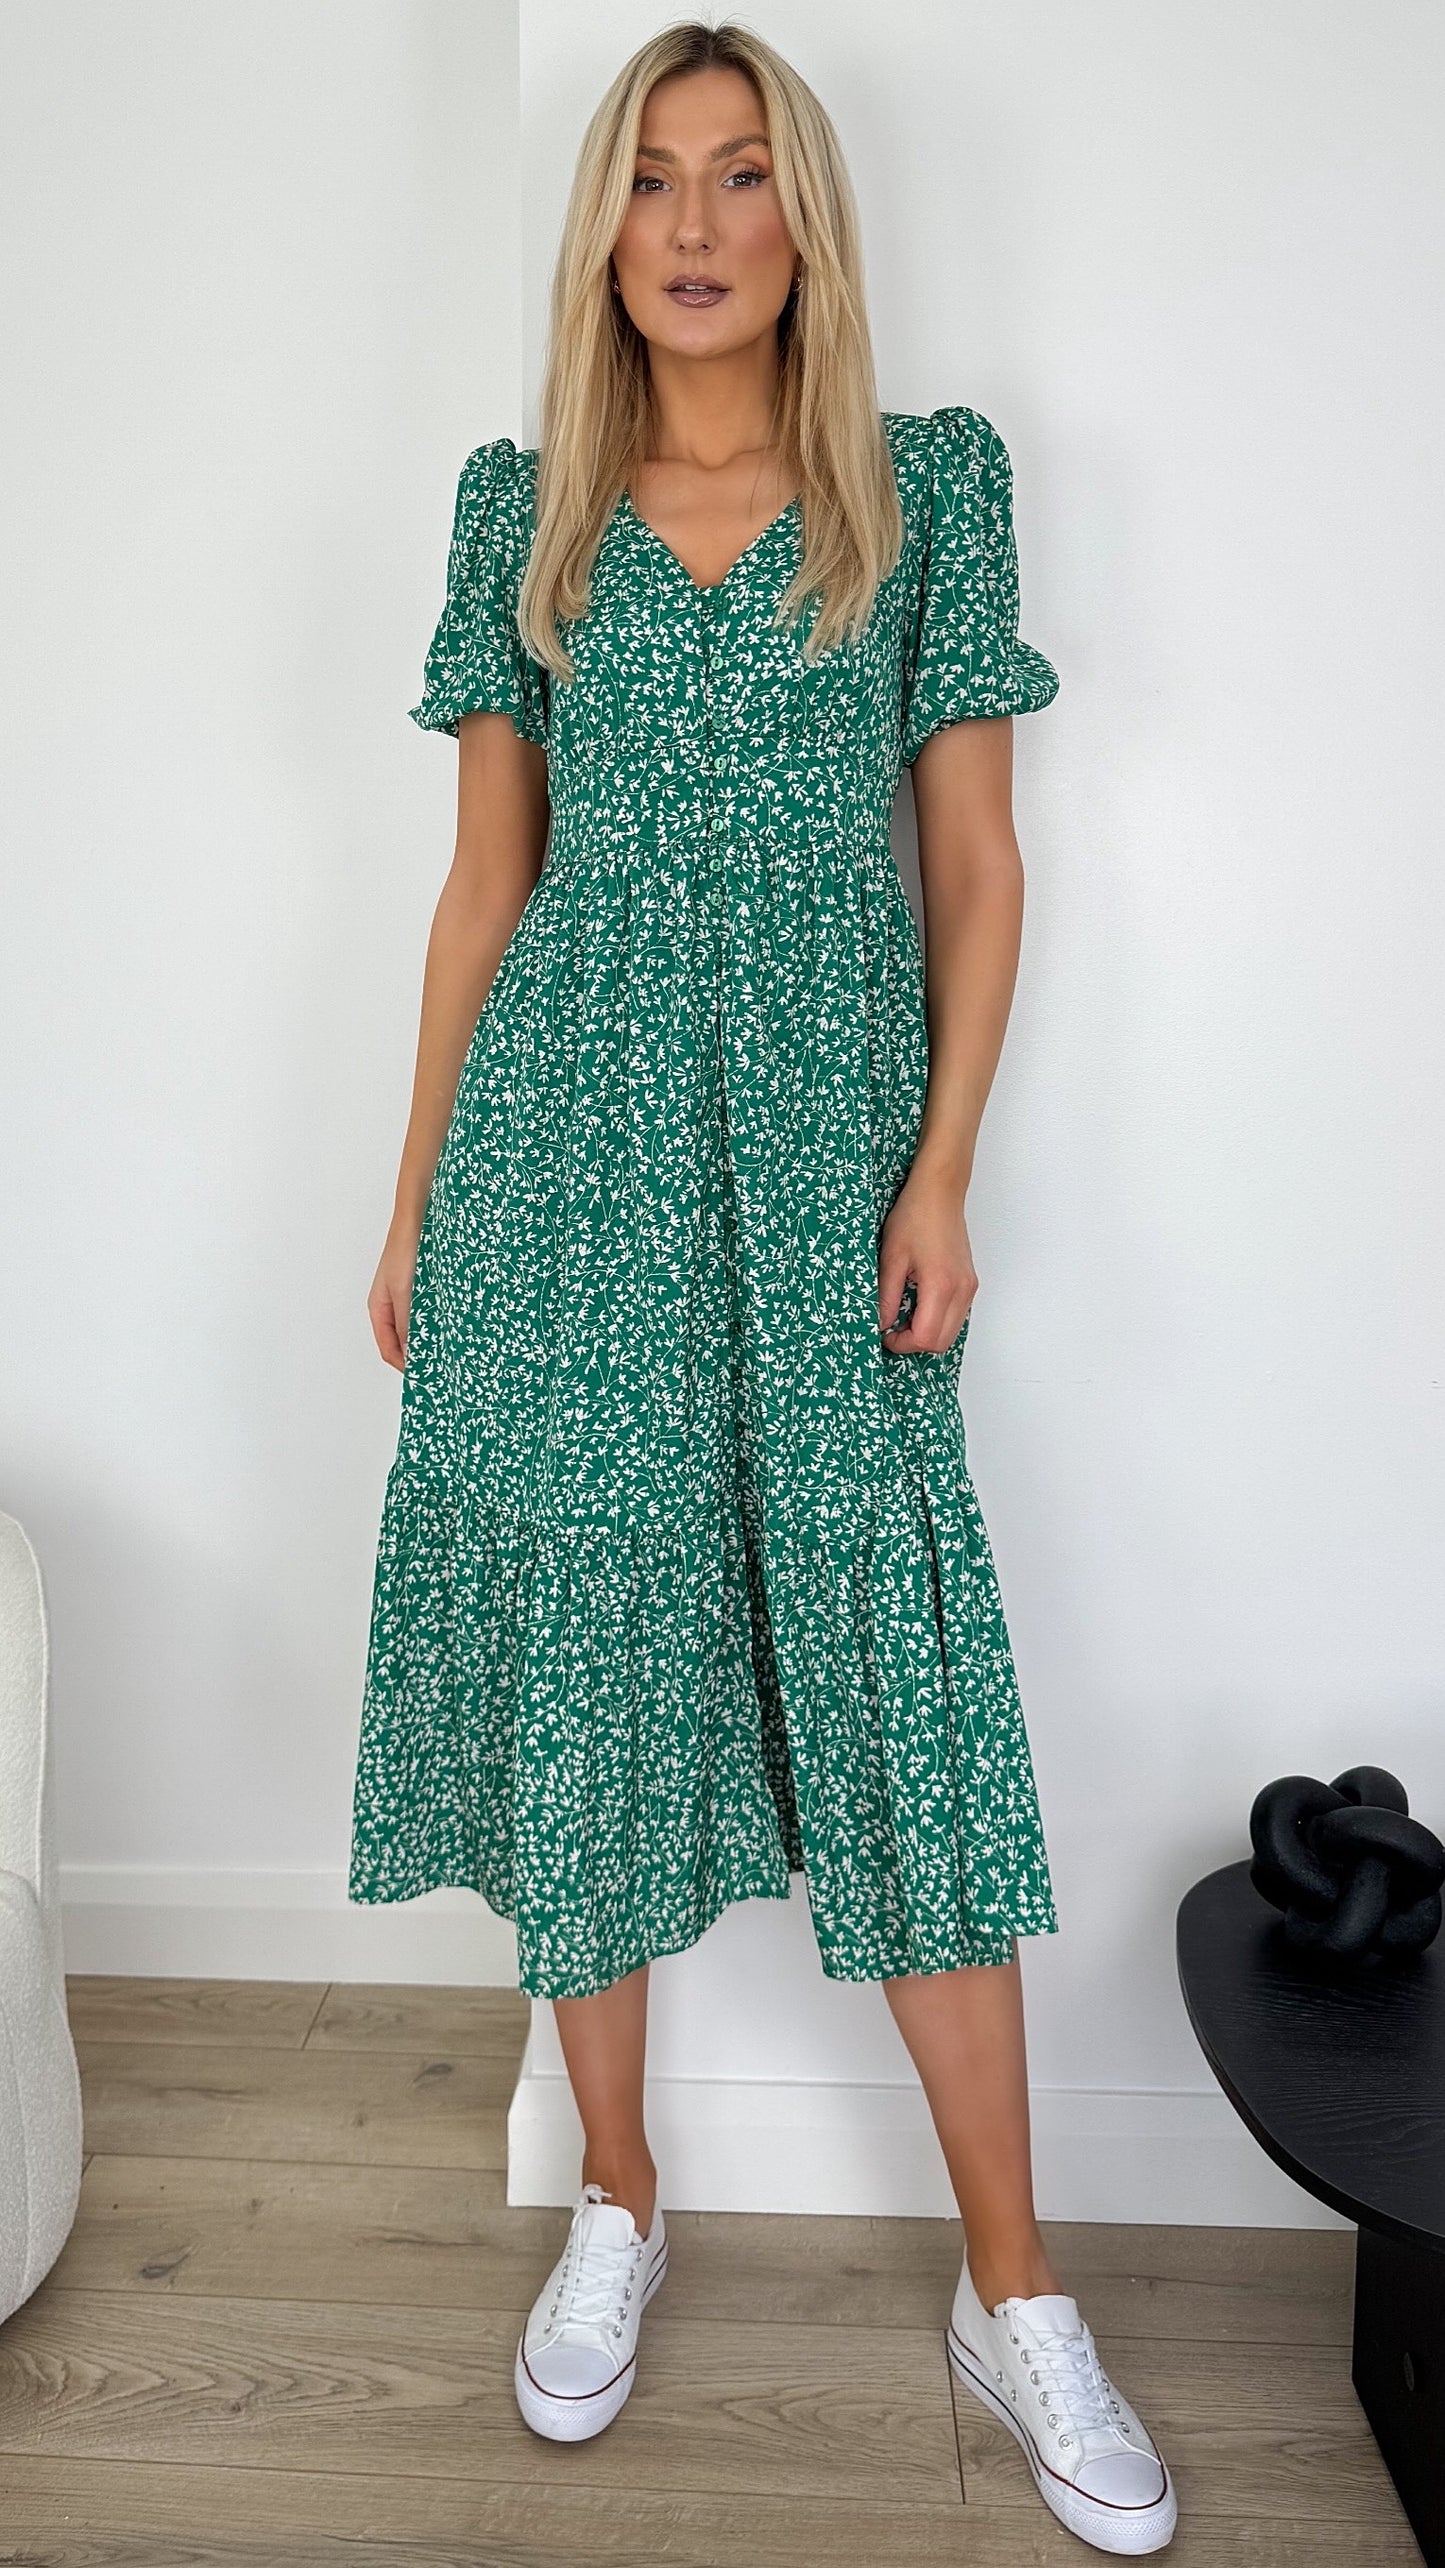 Lucy Floral Print Dress - Green